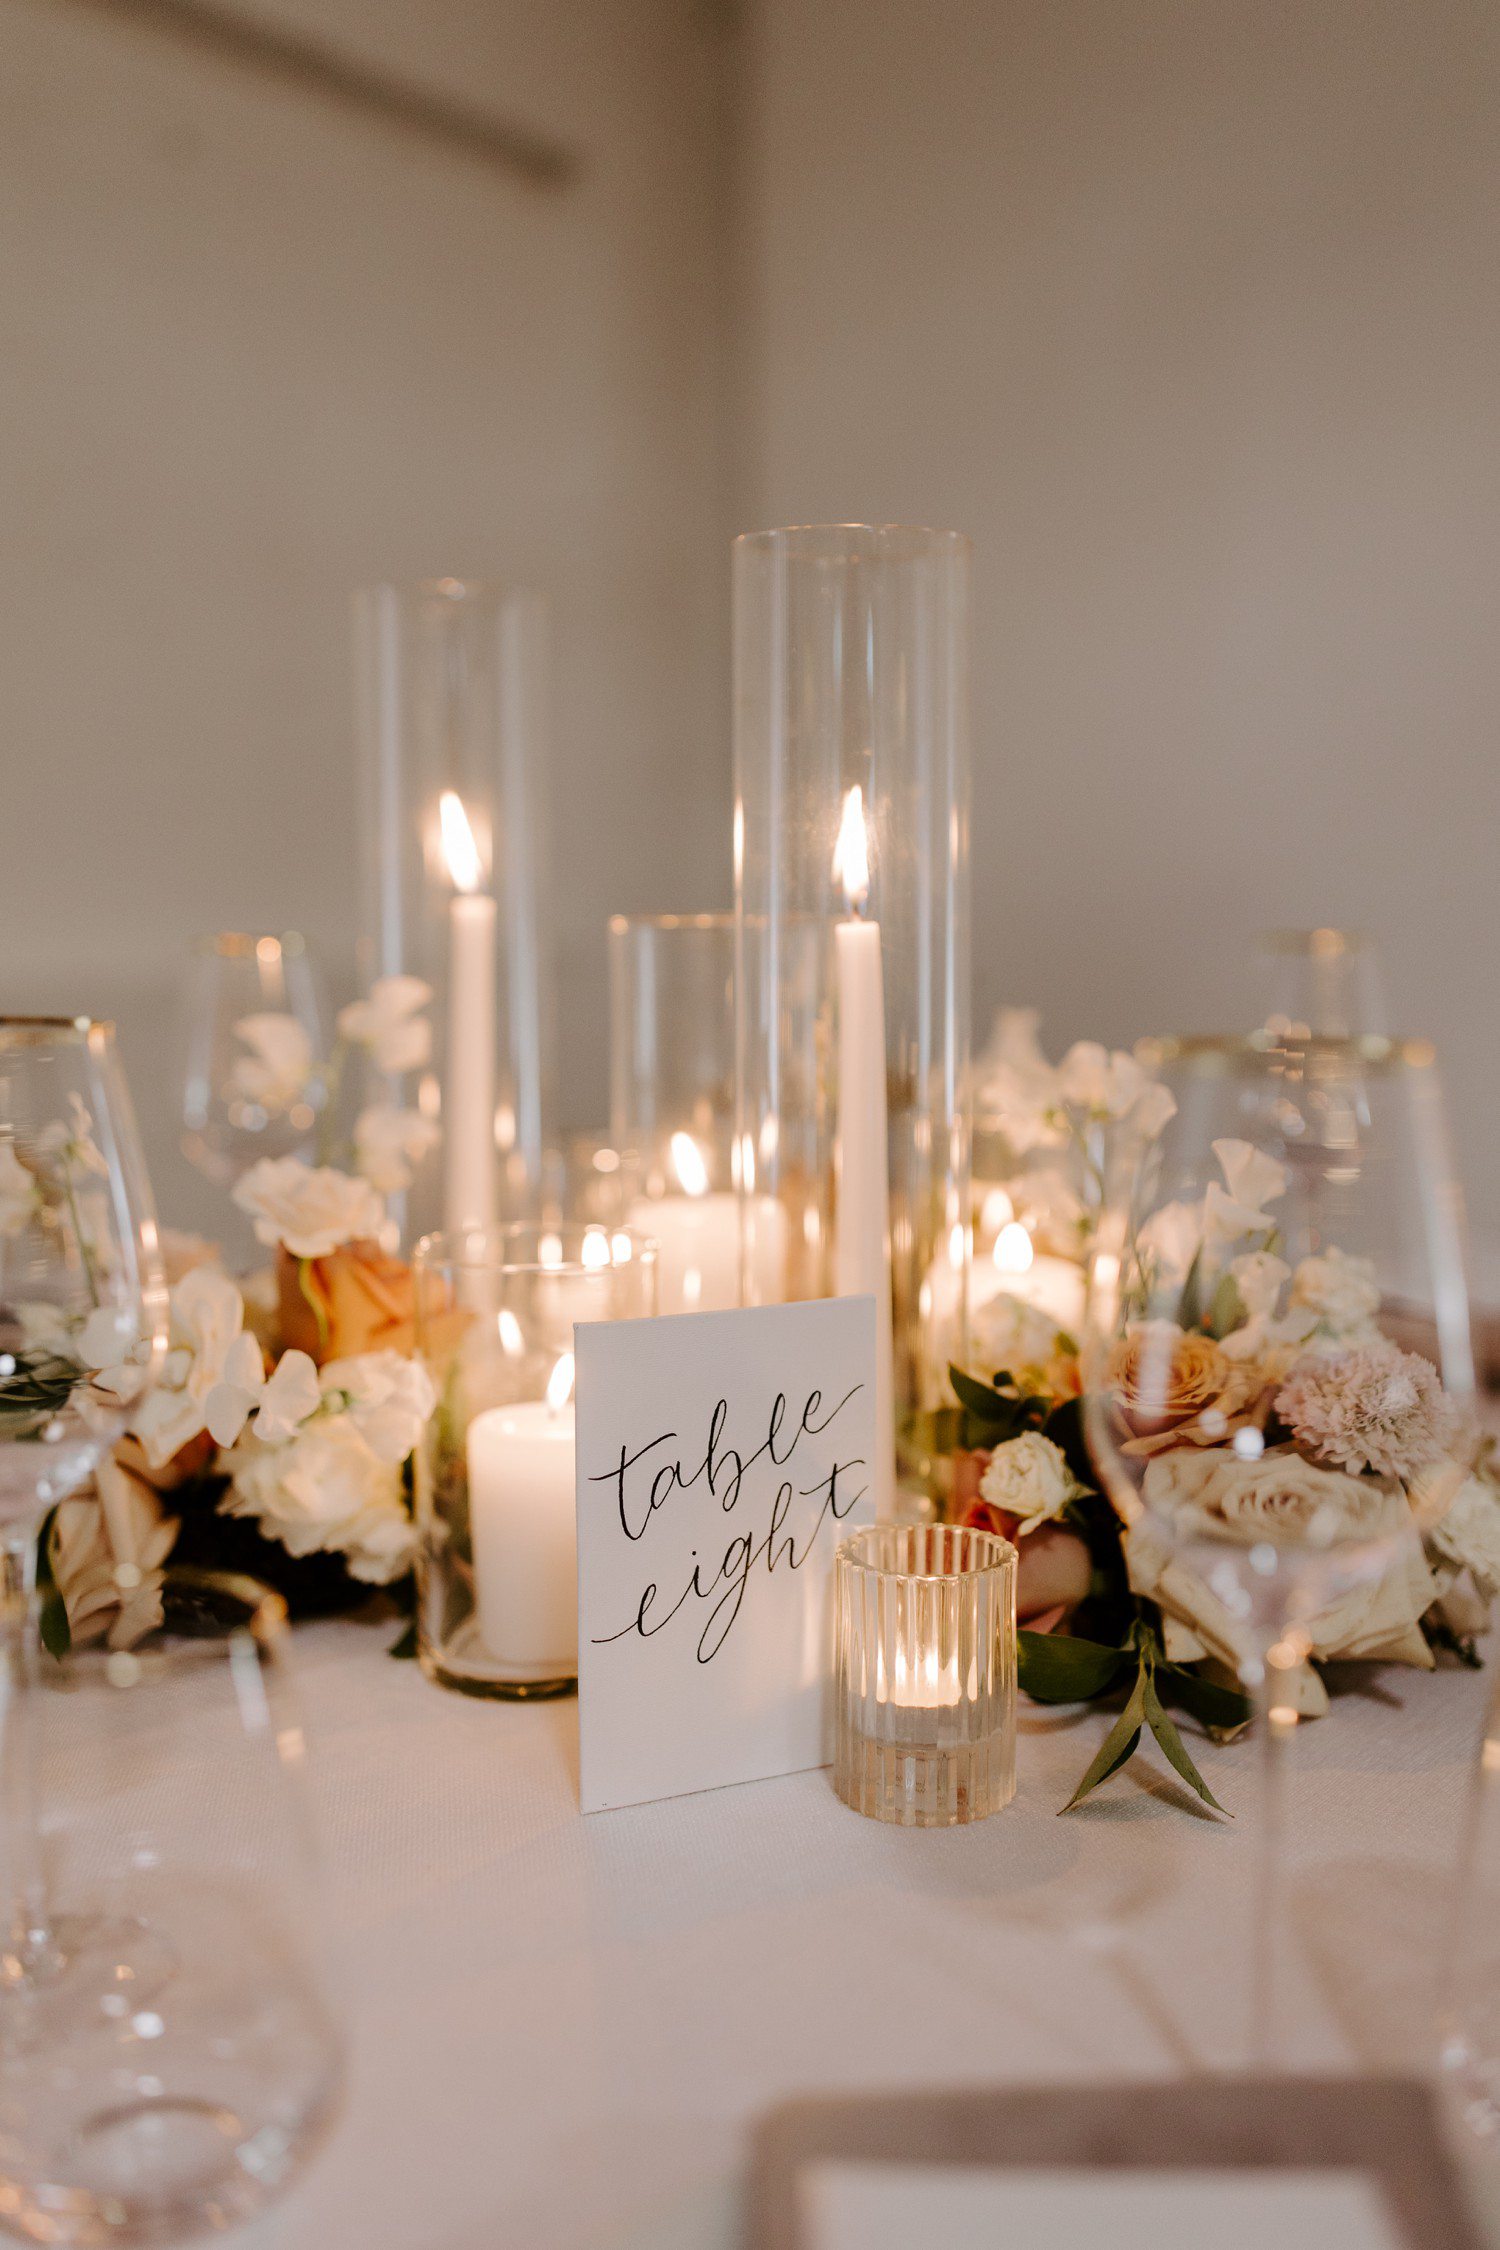 Wedding table decor with long white taper candles.